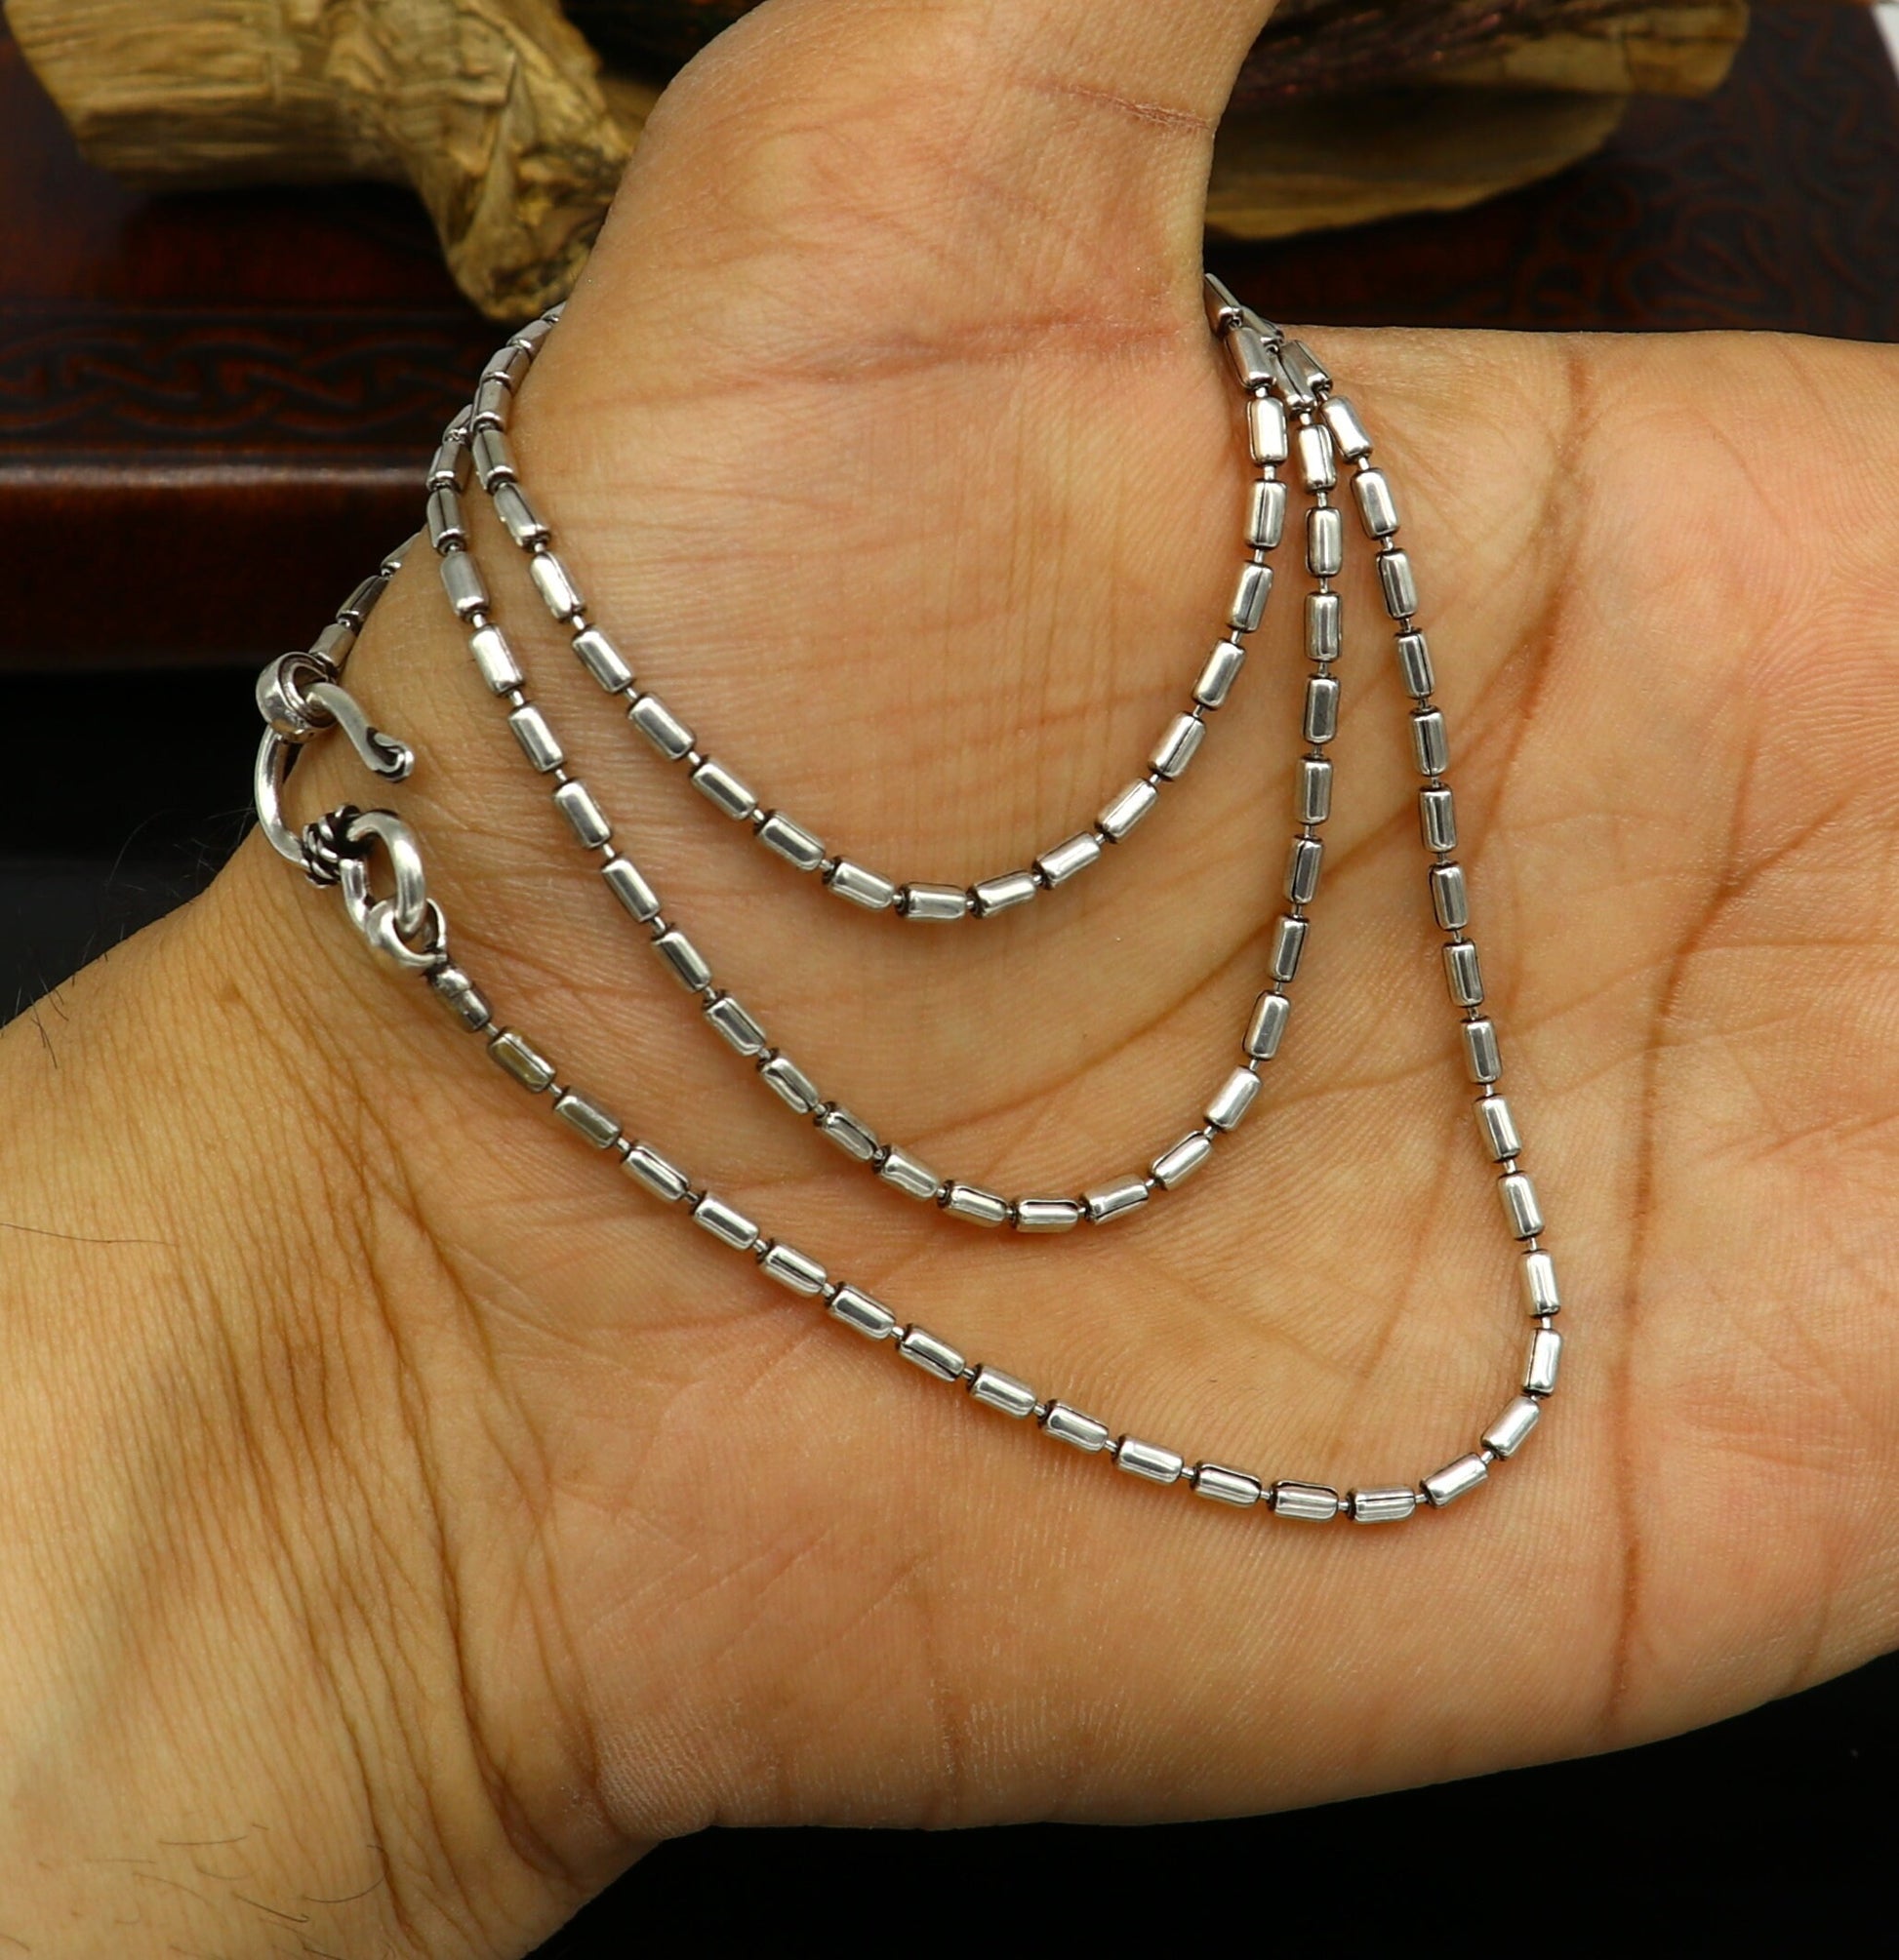 All size 925 sterling silver handmade customized fancy stylish silver beaded chain necklace baht chain best gifting jewelry from India nch45 - TRIBAL ORNAMENTS